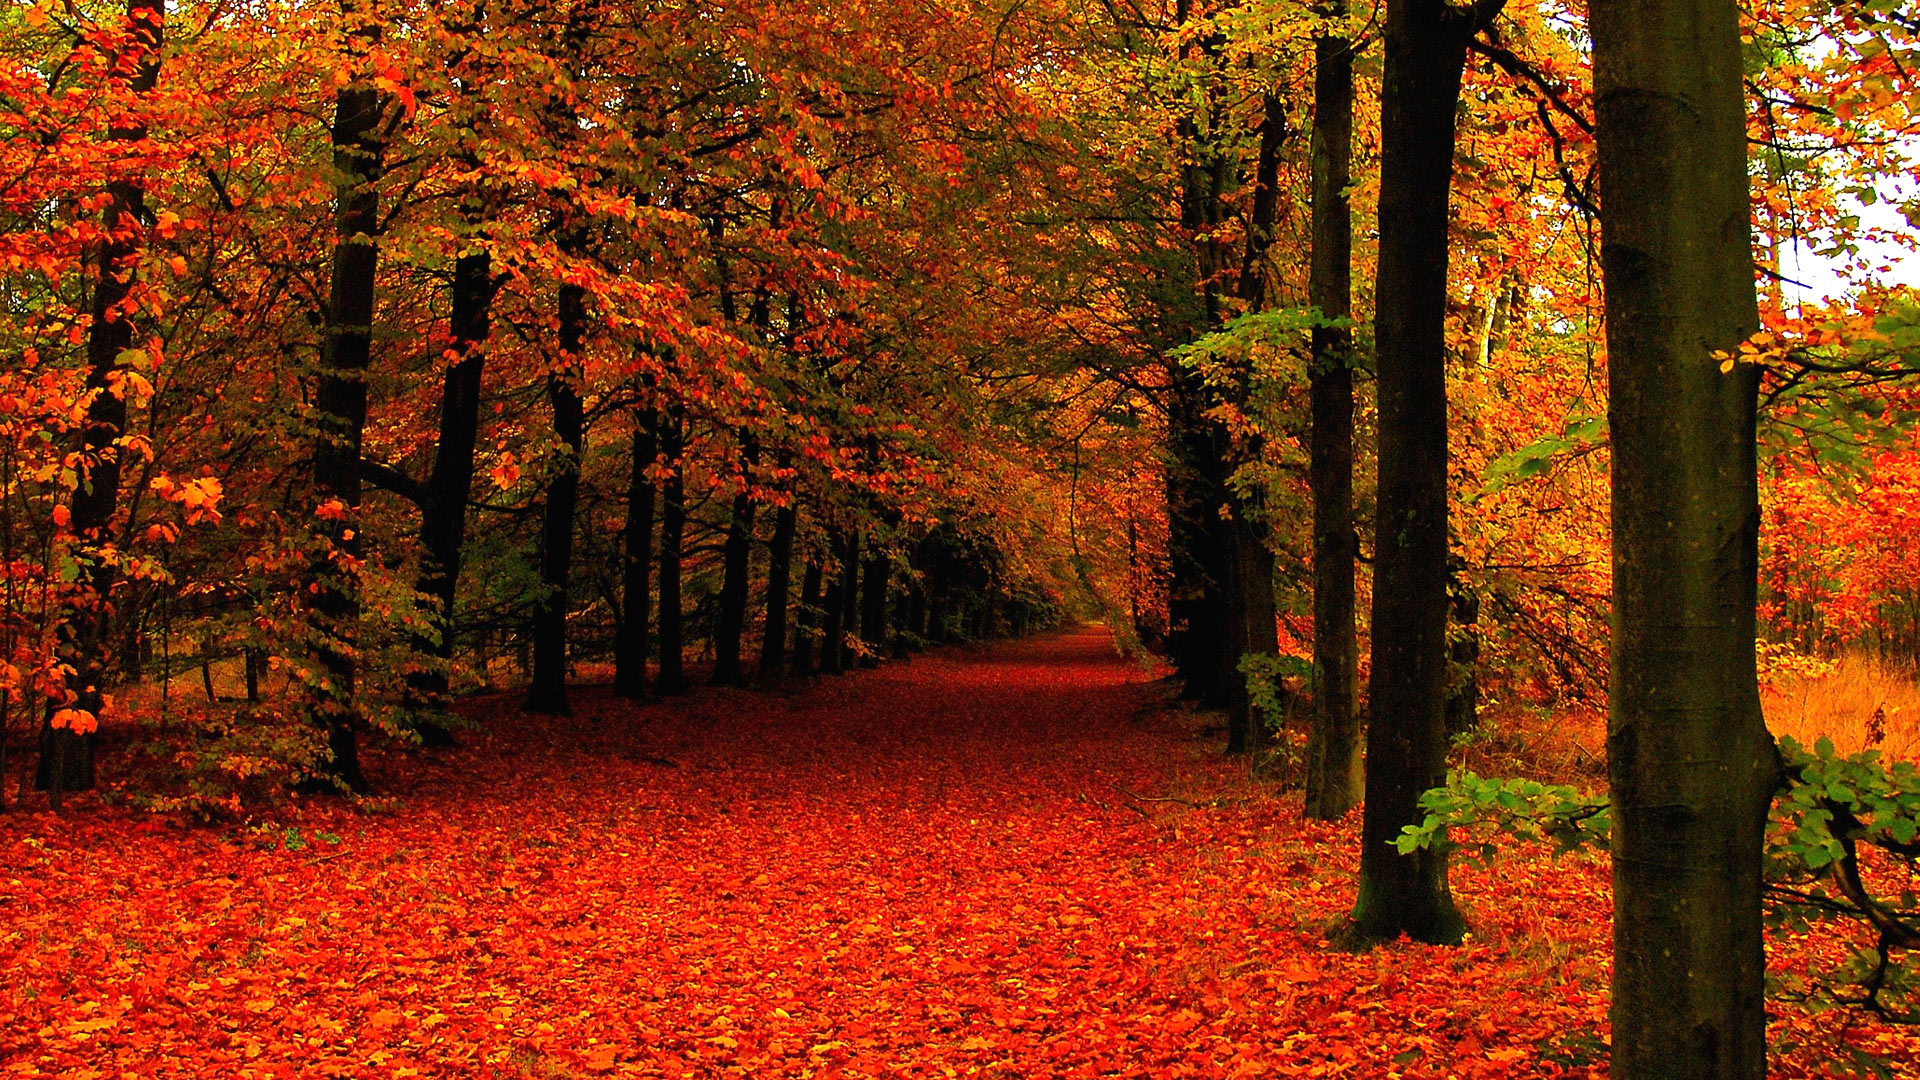 Gallery For gt Hd Fall Leaves Wallpapers